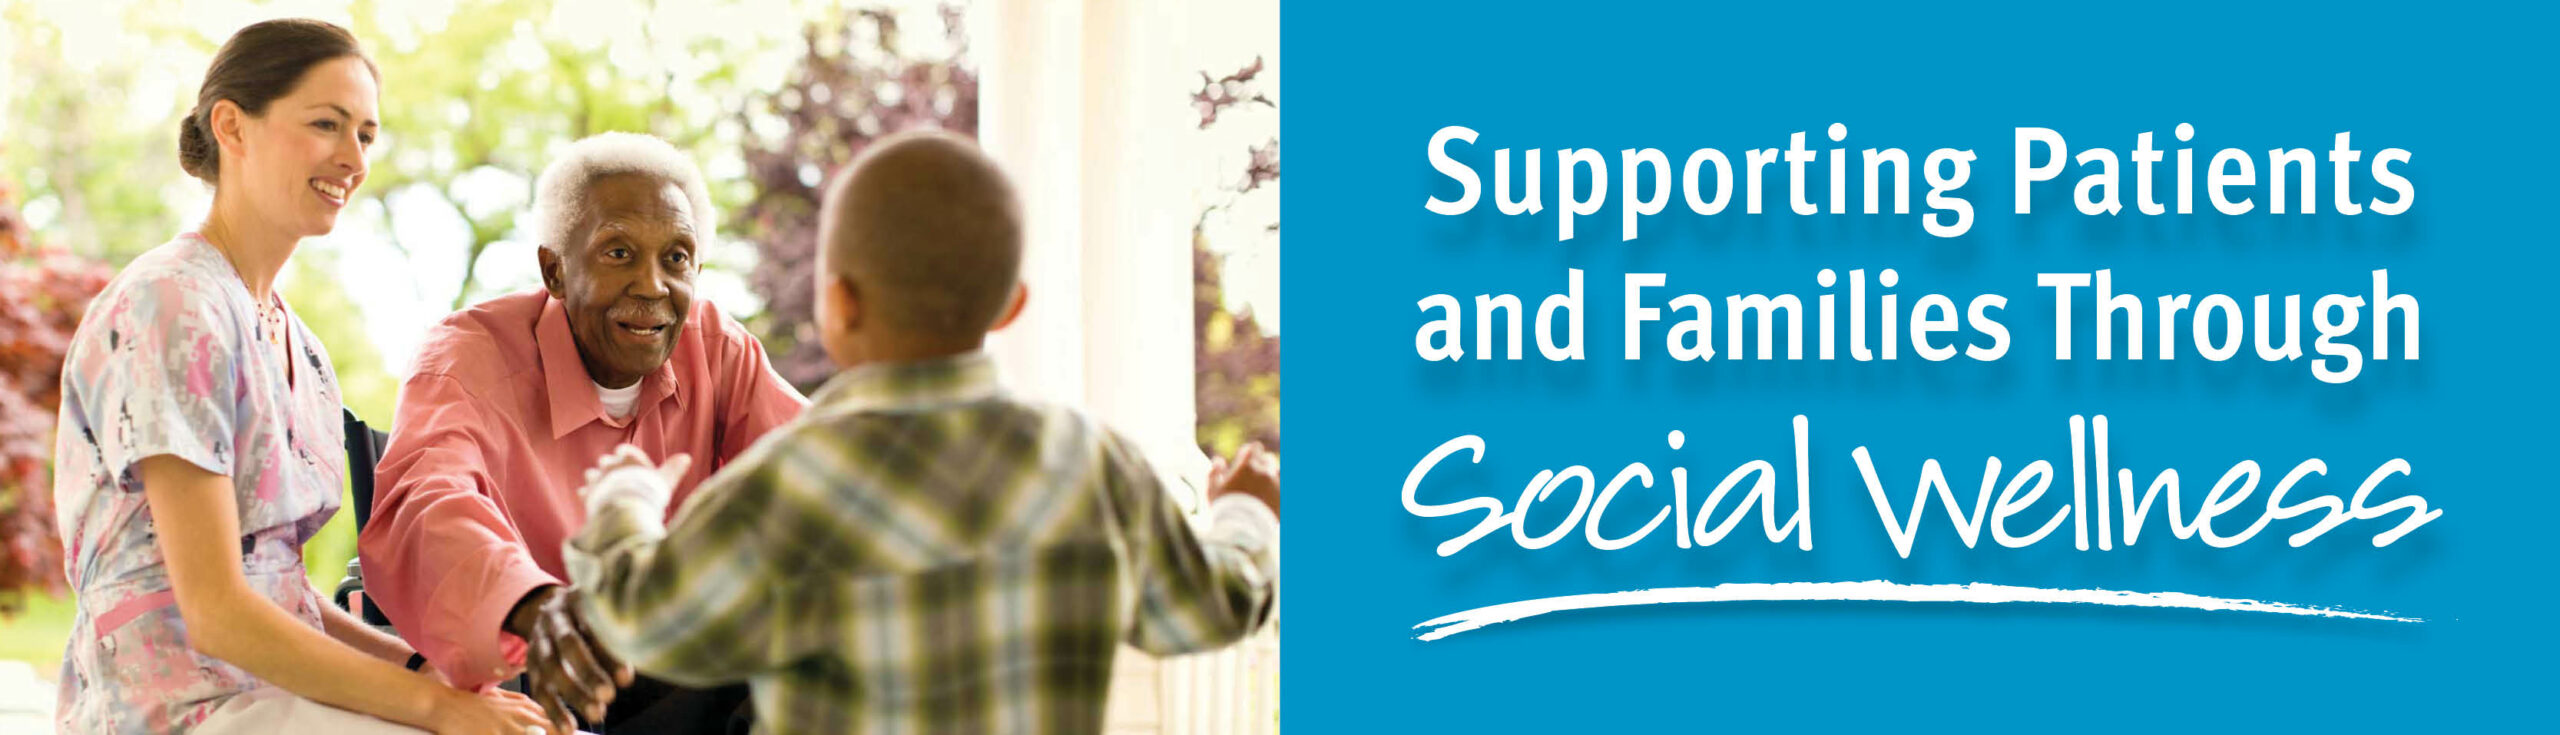 Supporting Patients and Families Through Social Wellness